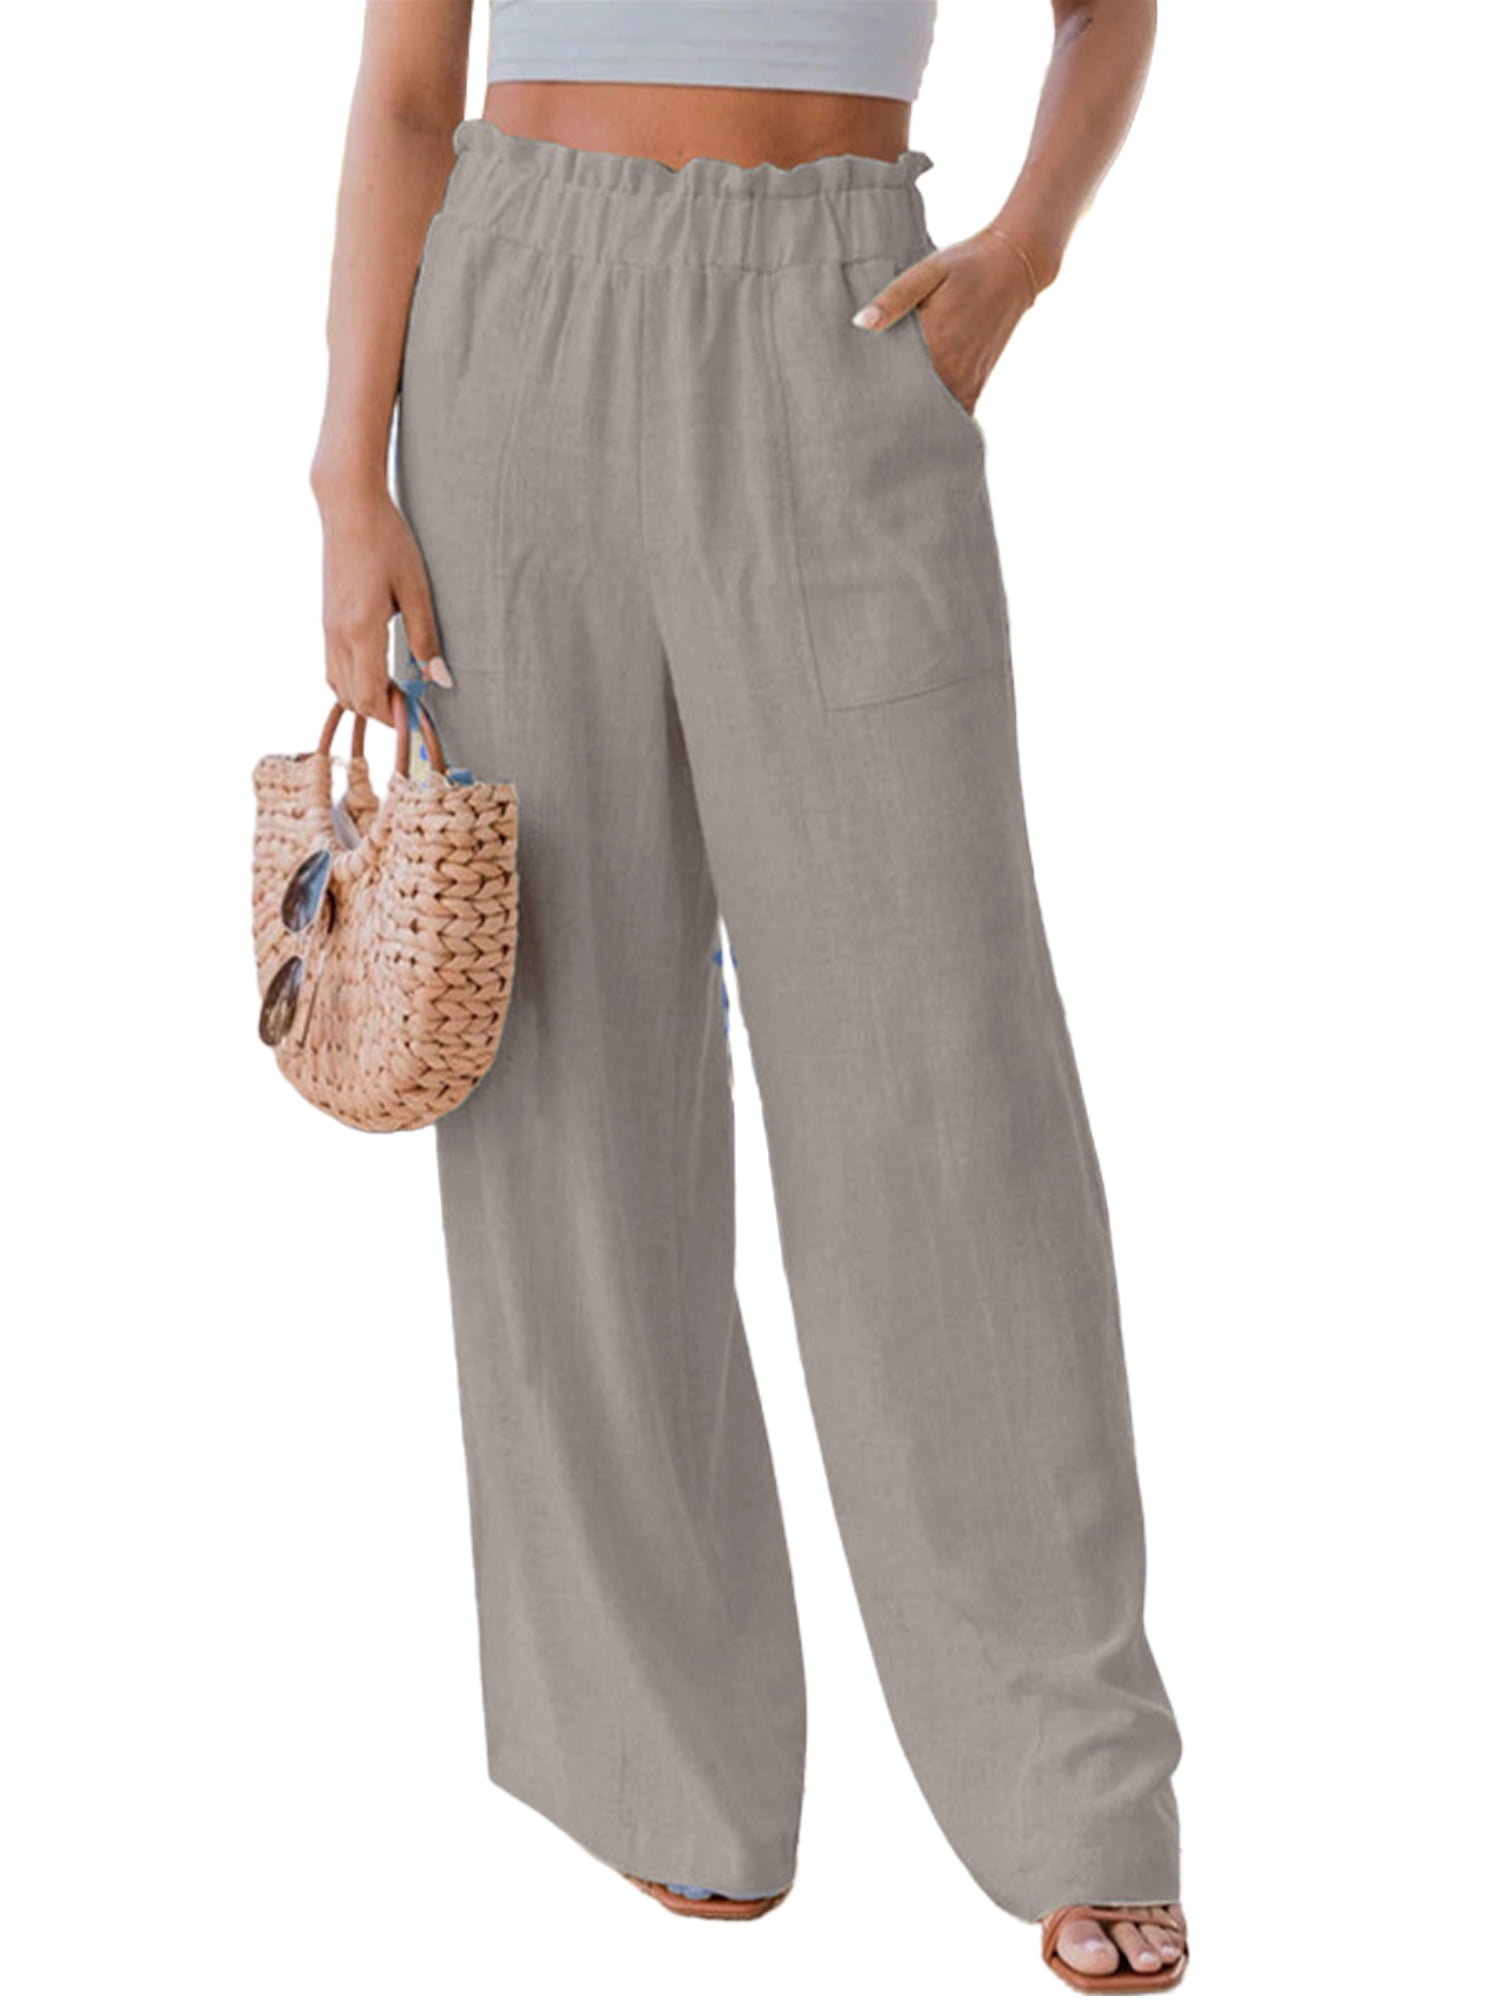 Buy Regular Fit Women Dark Green And White Rayon Trousers |Palazzo (Free  Size) at Amazon.in